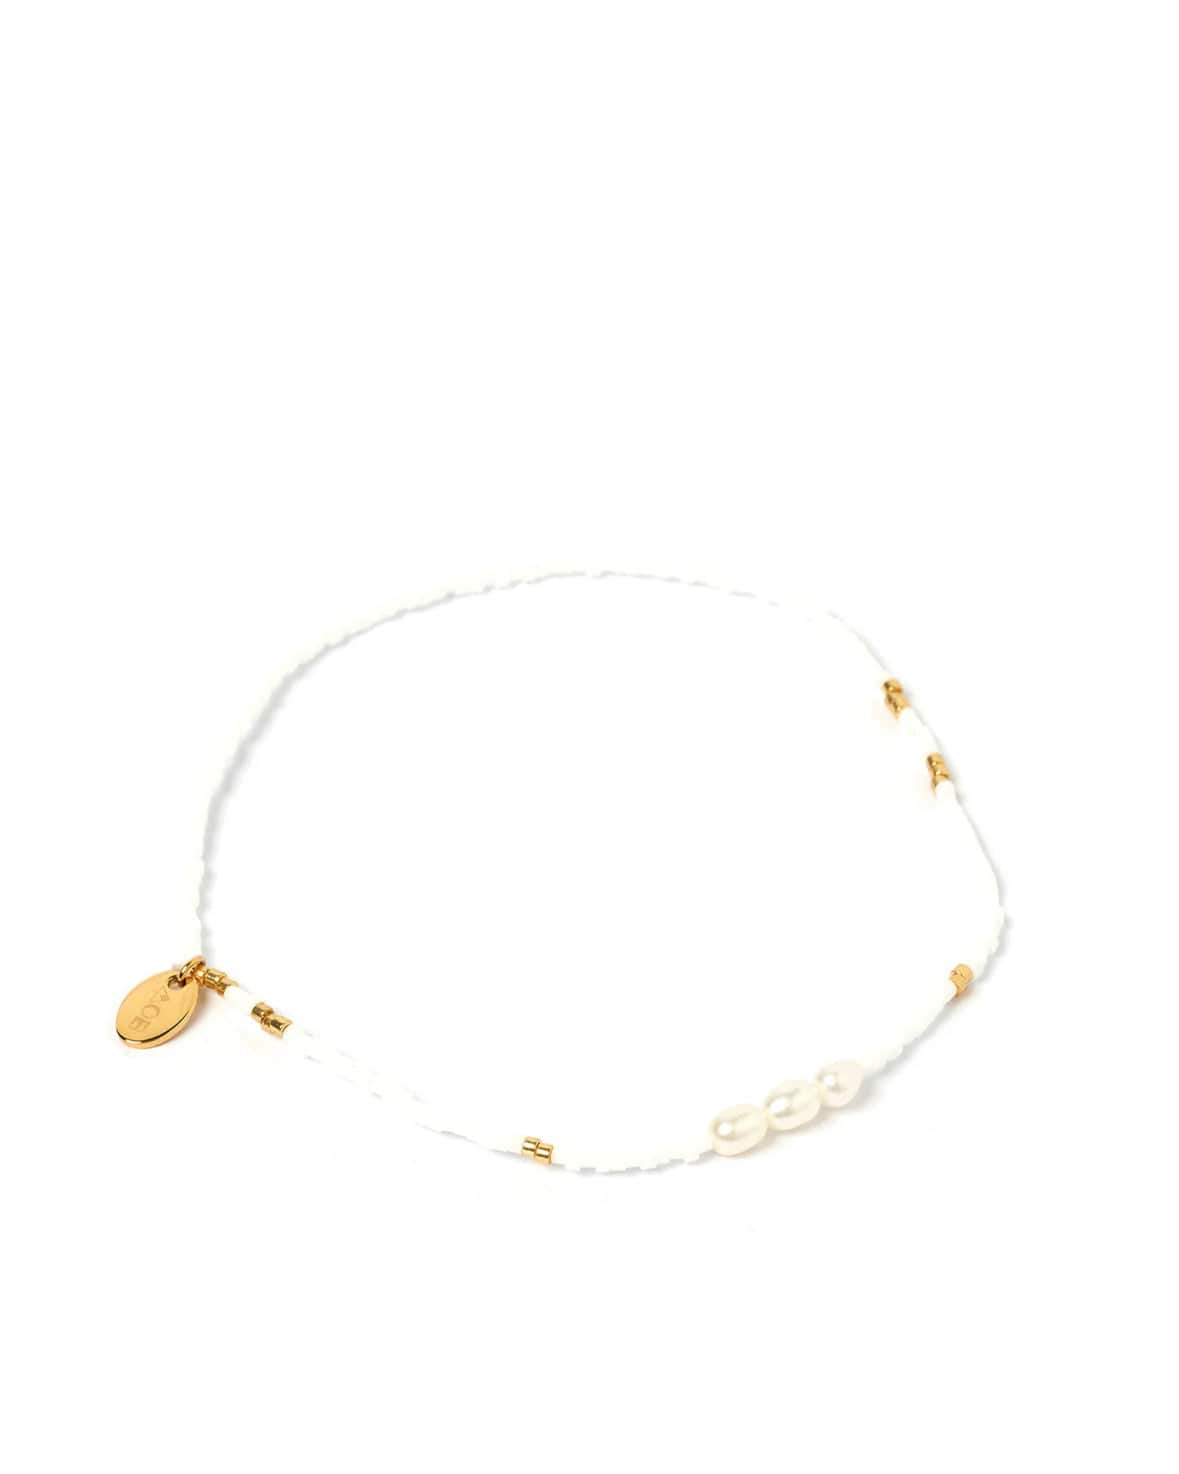 Poppy Pearl + Glass Bead Anklet White For Her by Arms of Eve